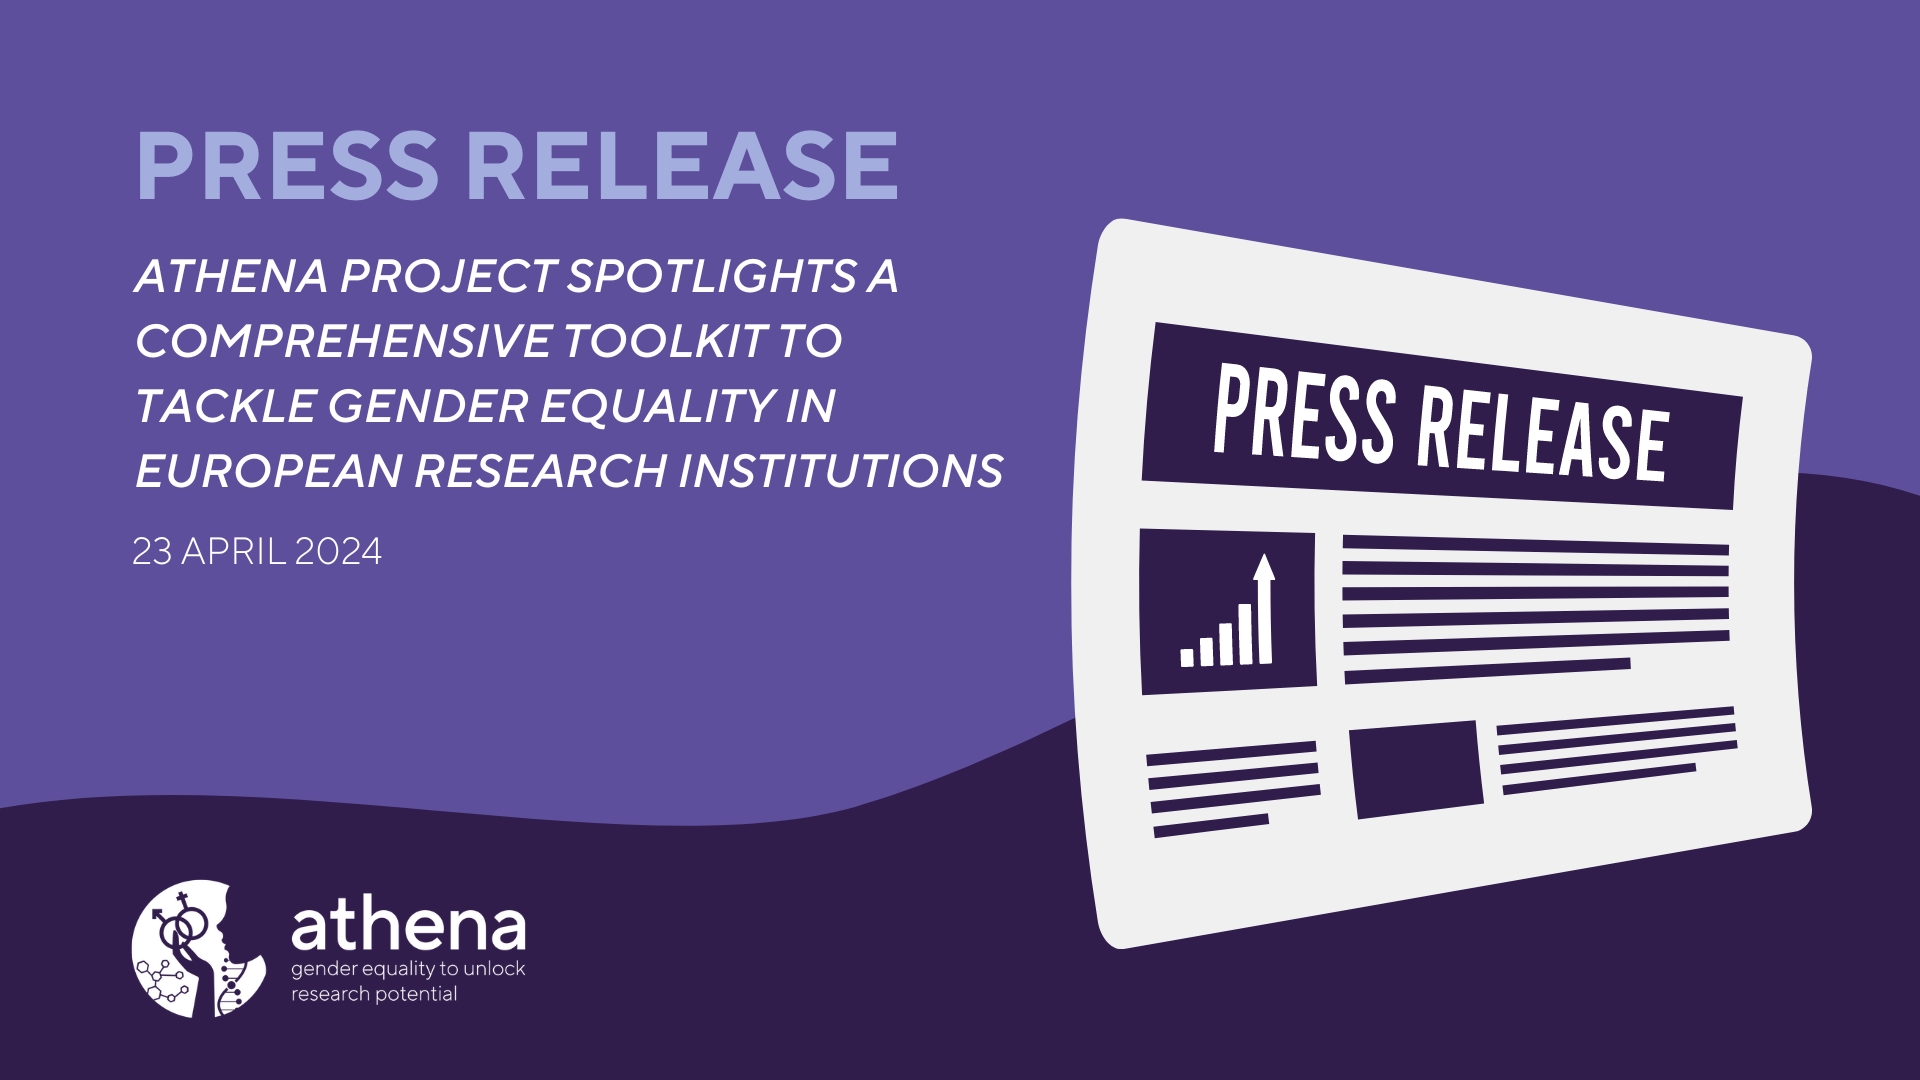 Press Release: ATHENA Project spotlights a comprehensive Toolkit to tackle Gender Equality in European Research Institutions